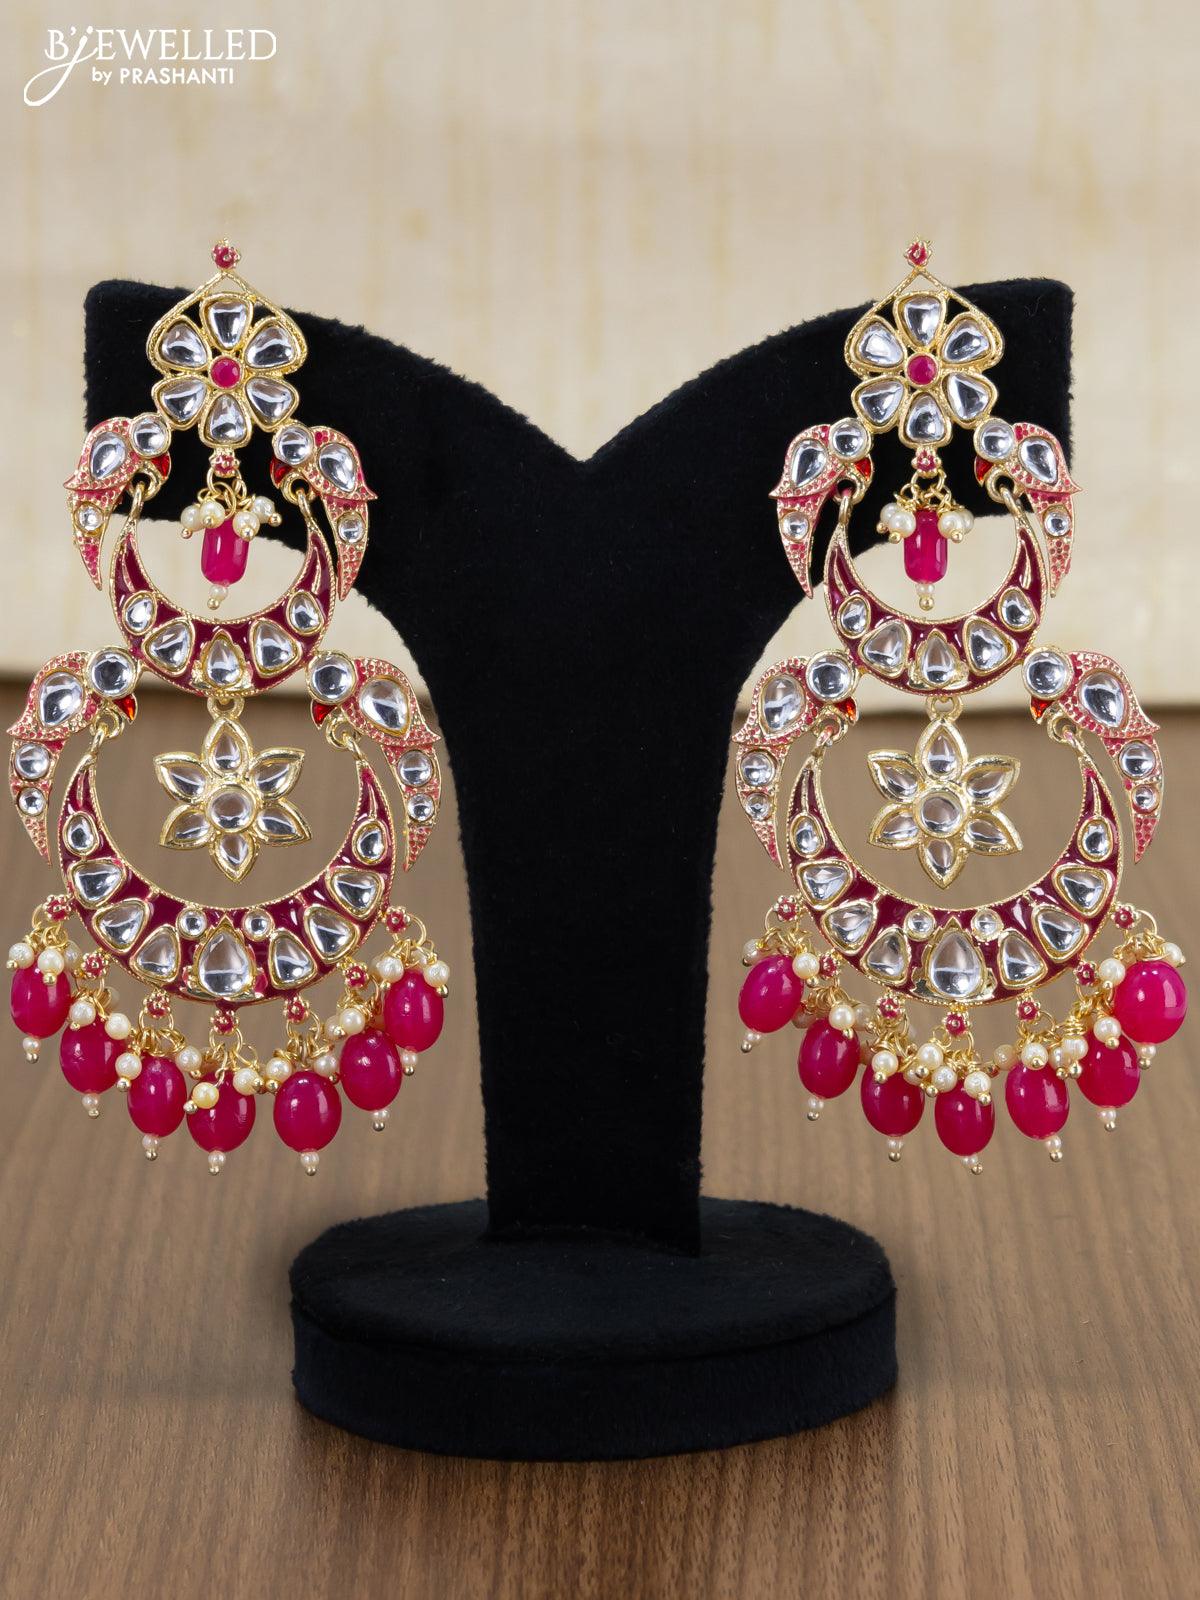 Light Weight Earrings - South Indian Temple Jewellery | Arjunazz